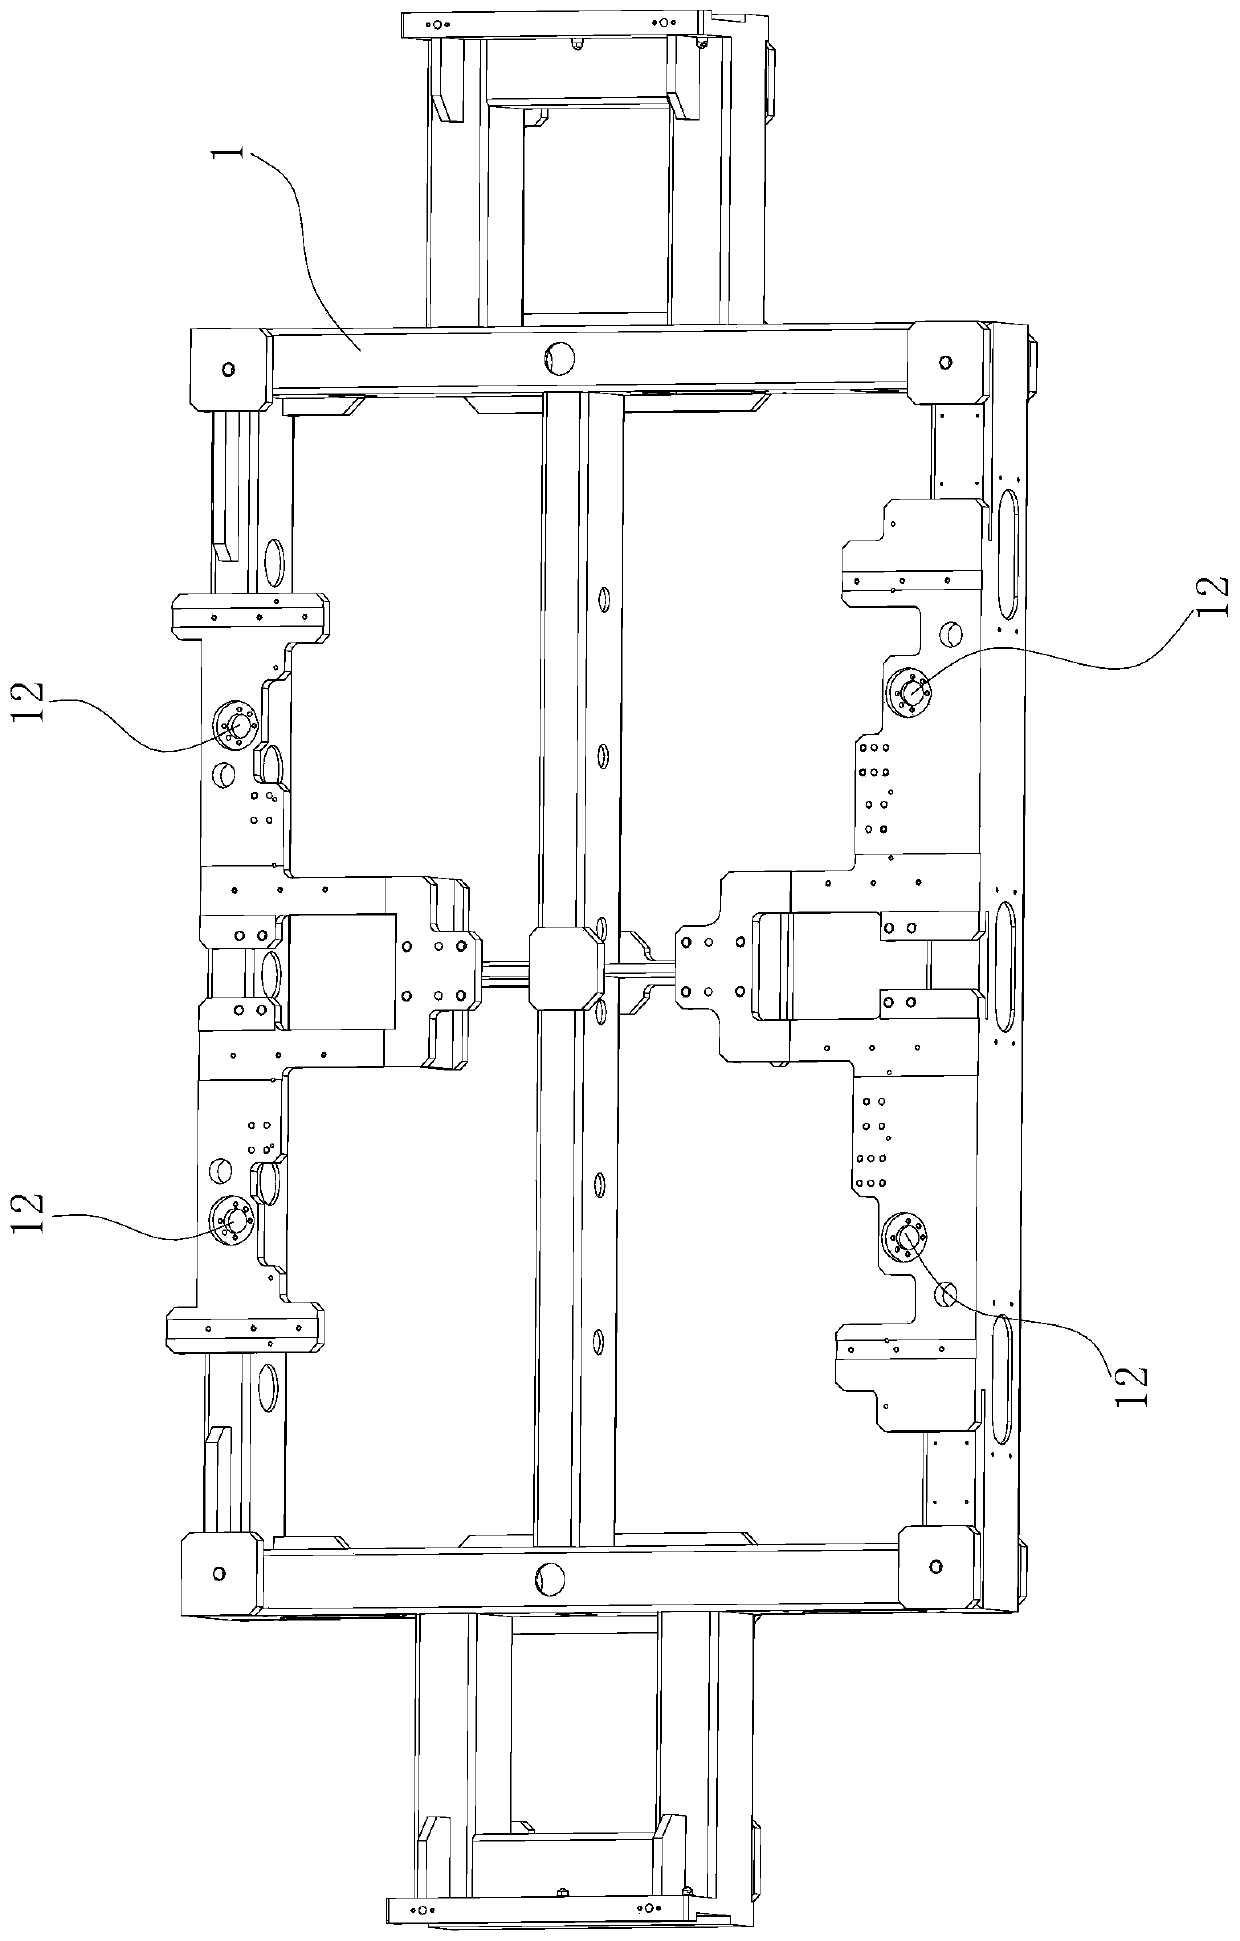 Auxiliary frame positioning and assembling tool